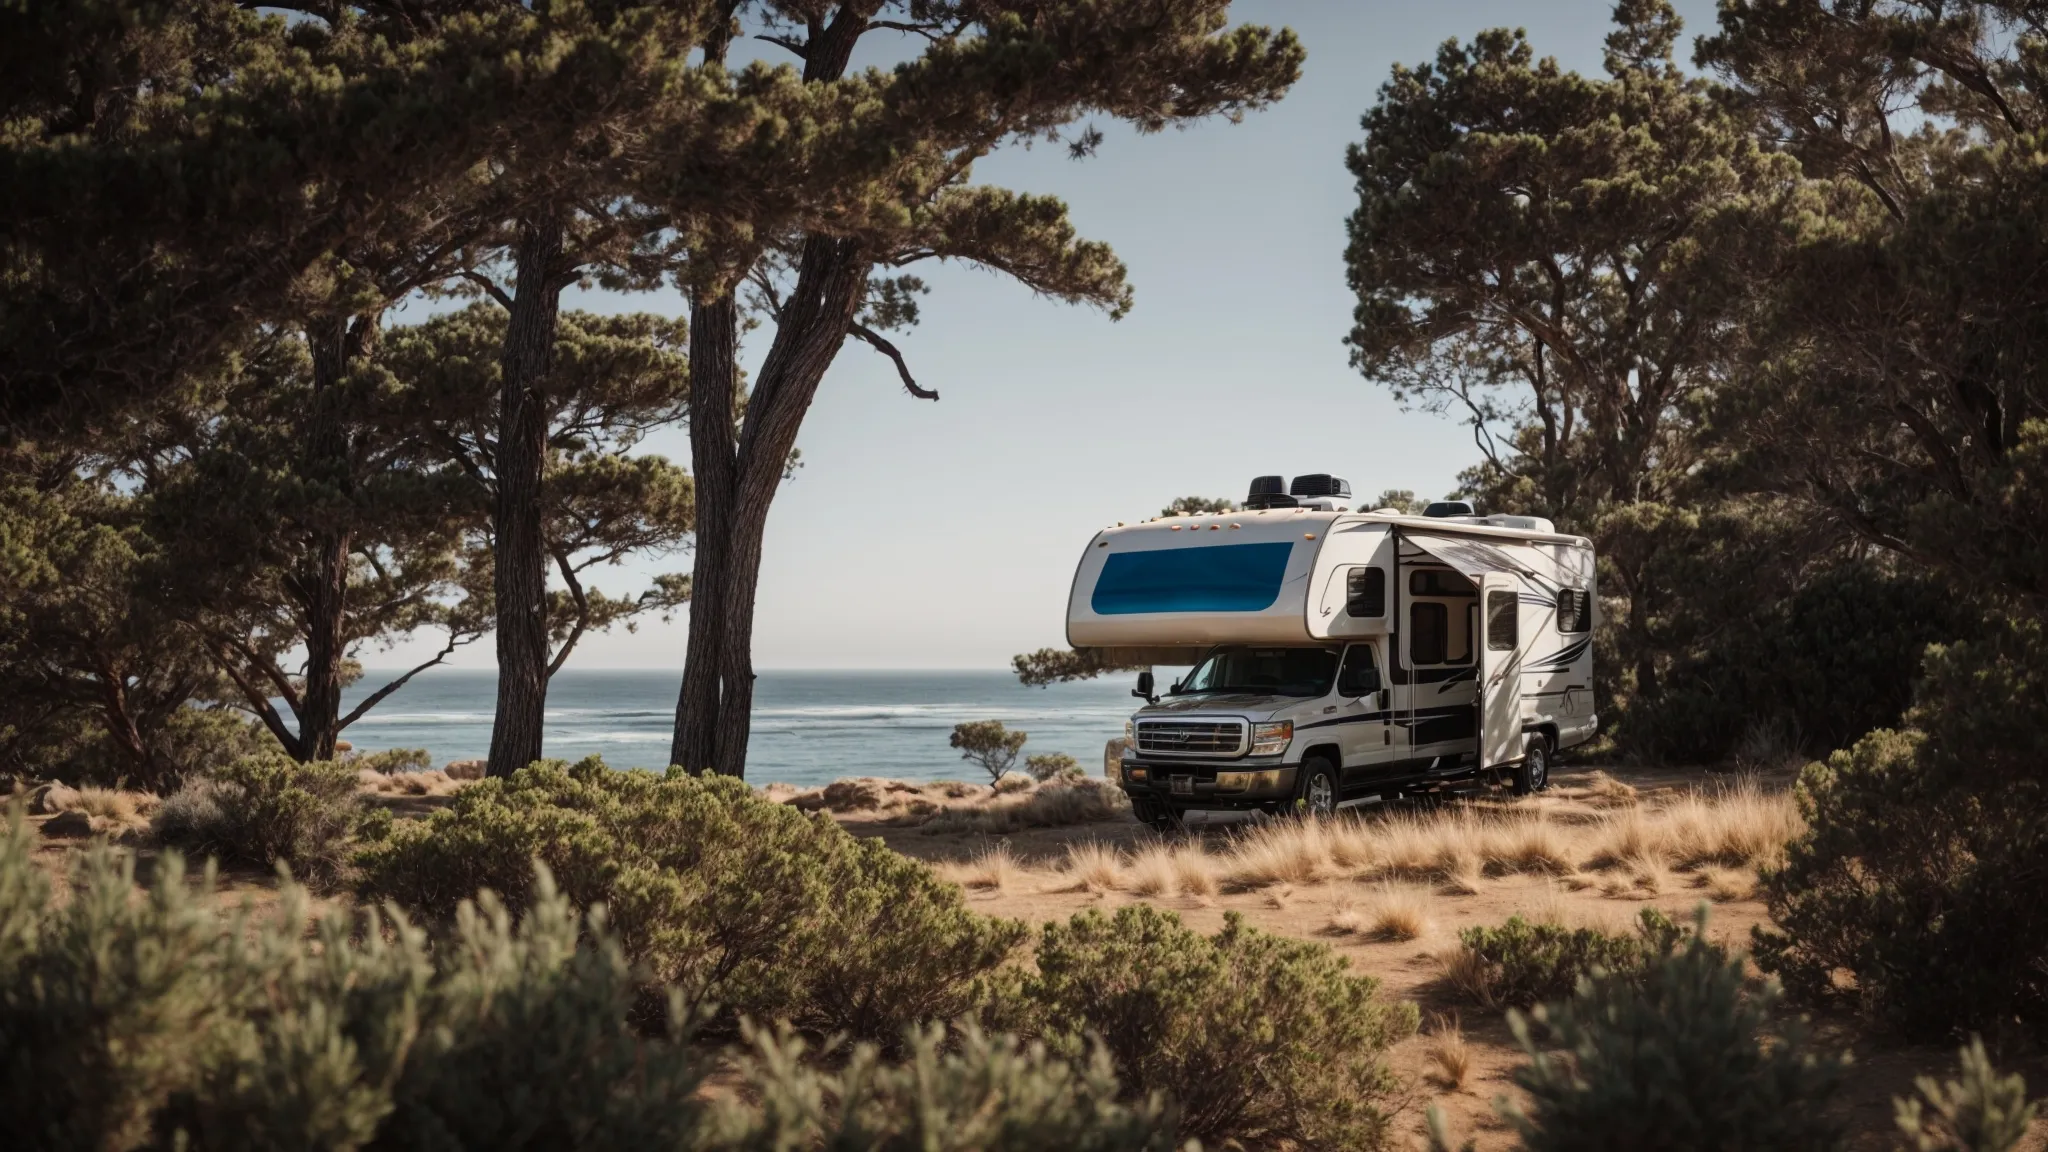 an rv settled among trees at a tranquil san diego campground with the pacific ocean in the background.